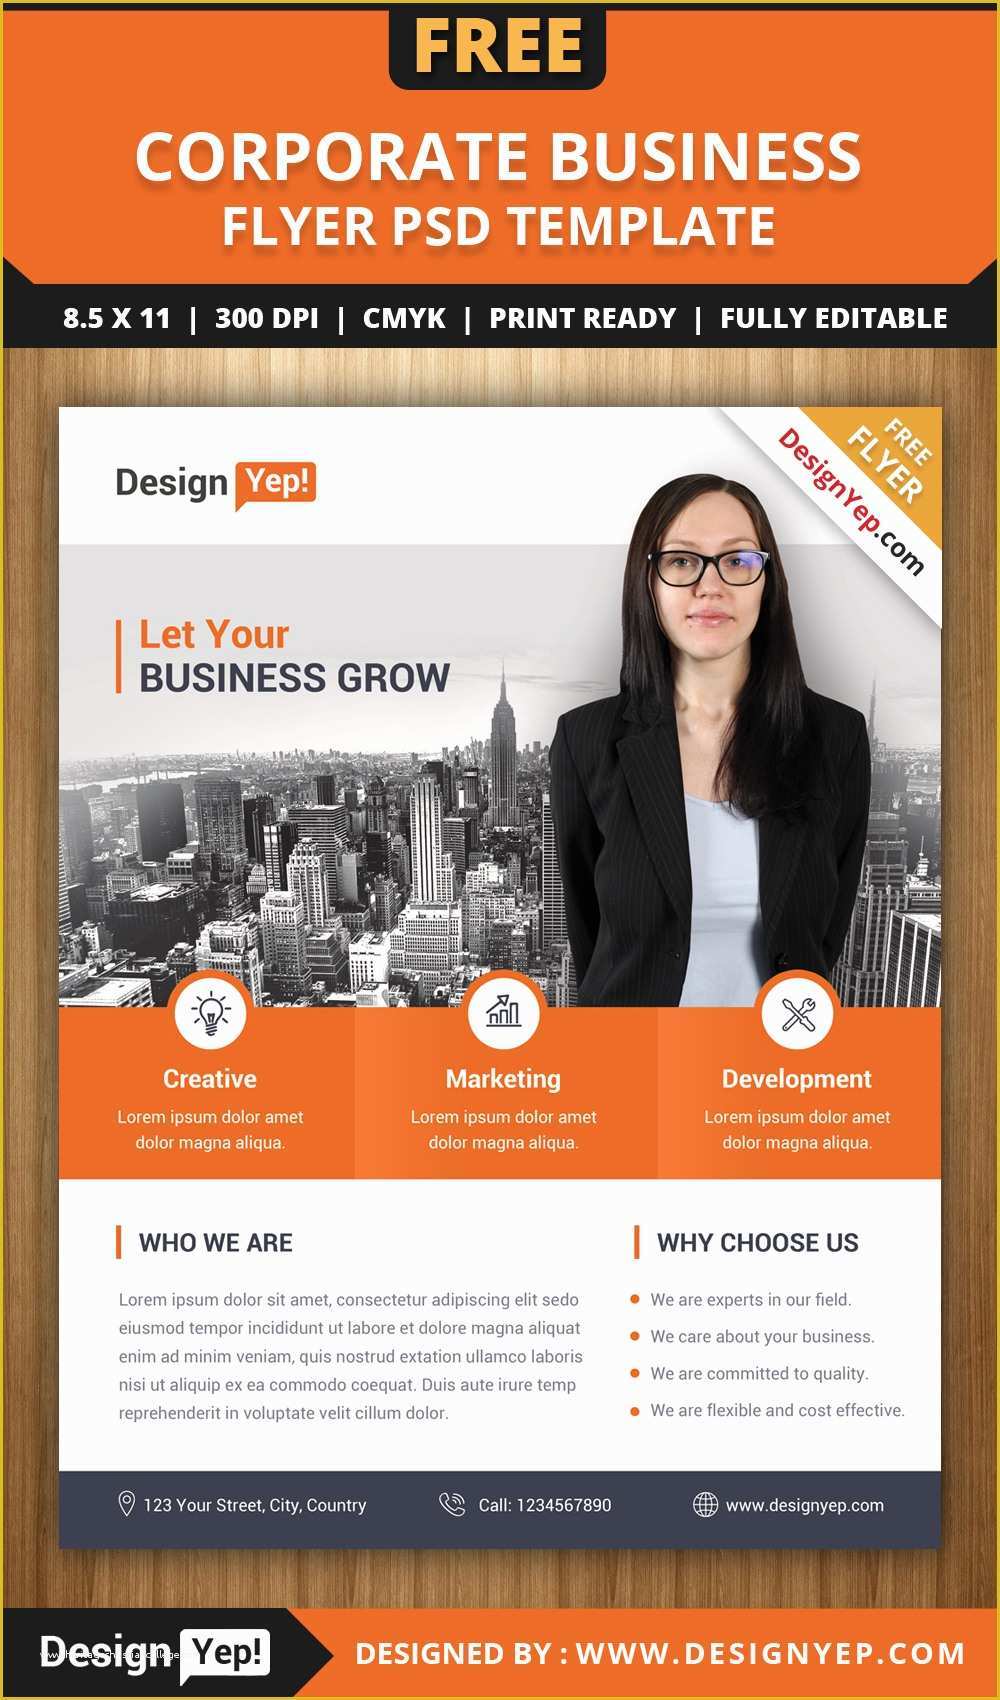 Free Psd Business Flyer Templates Of Free Corporate Business Flyer Psd Template Designyep